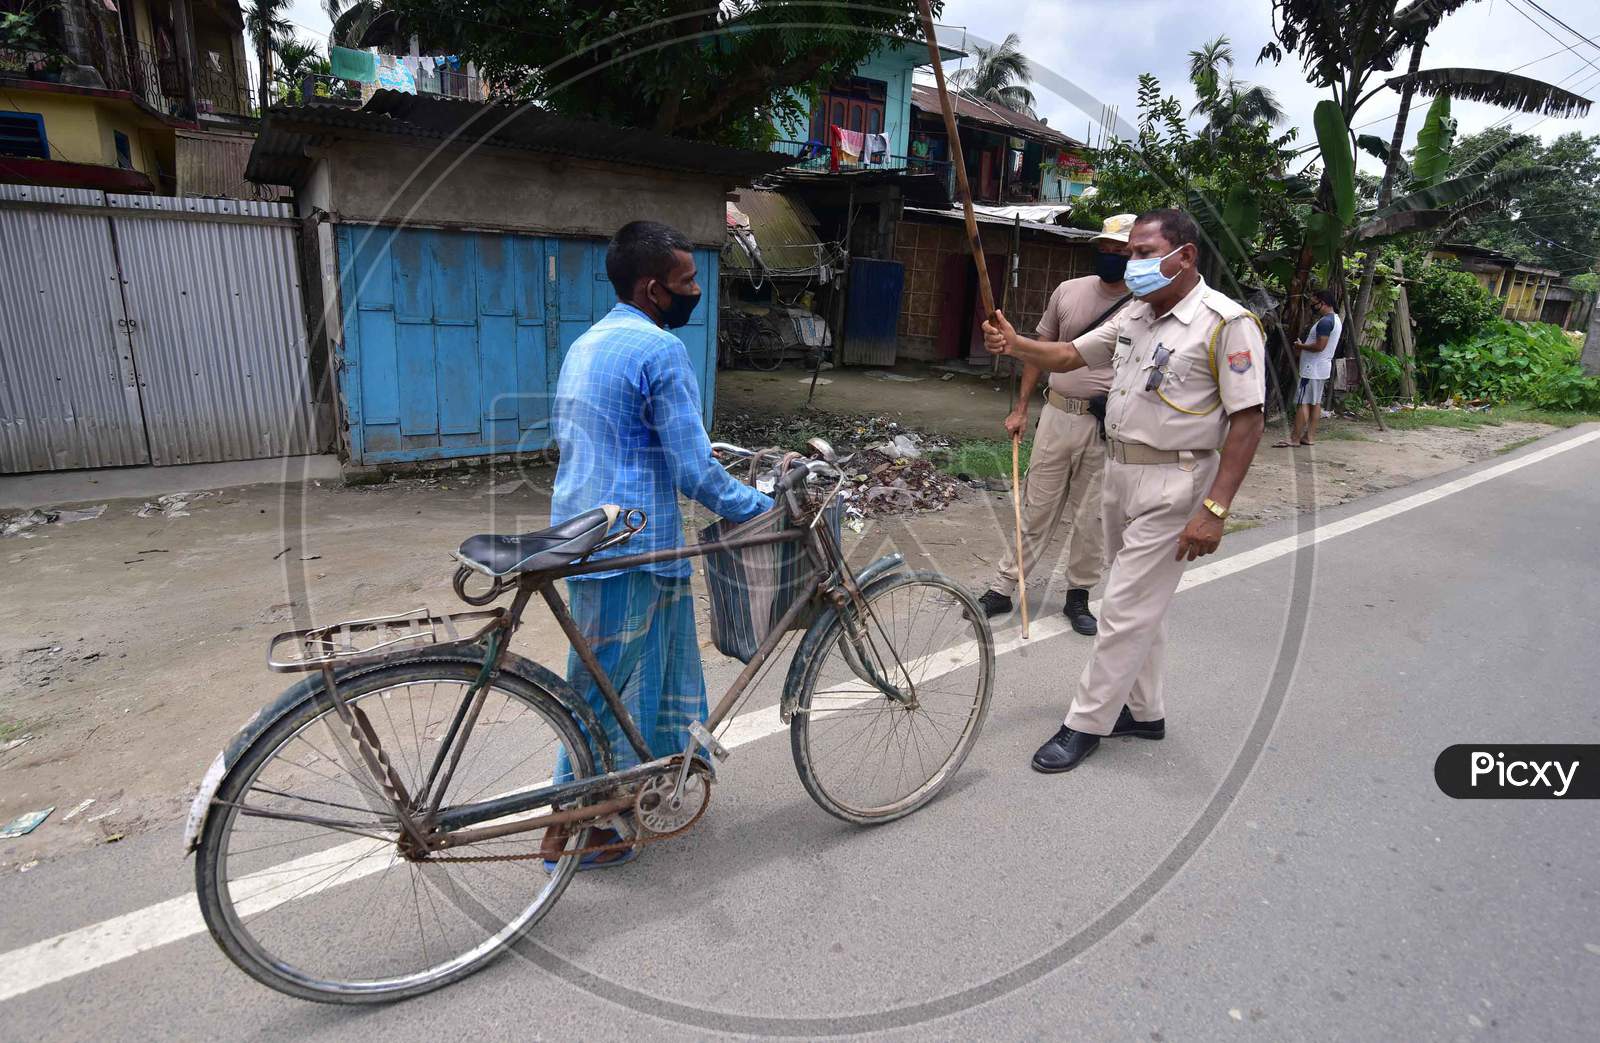 Police questioning a person  during the lockdown imposed to curb the spread of Coronavirus in Nagaon, Assam on July 05, 2020